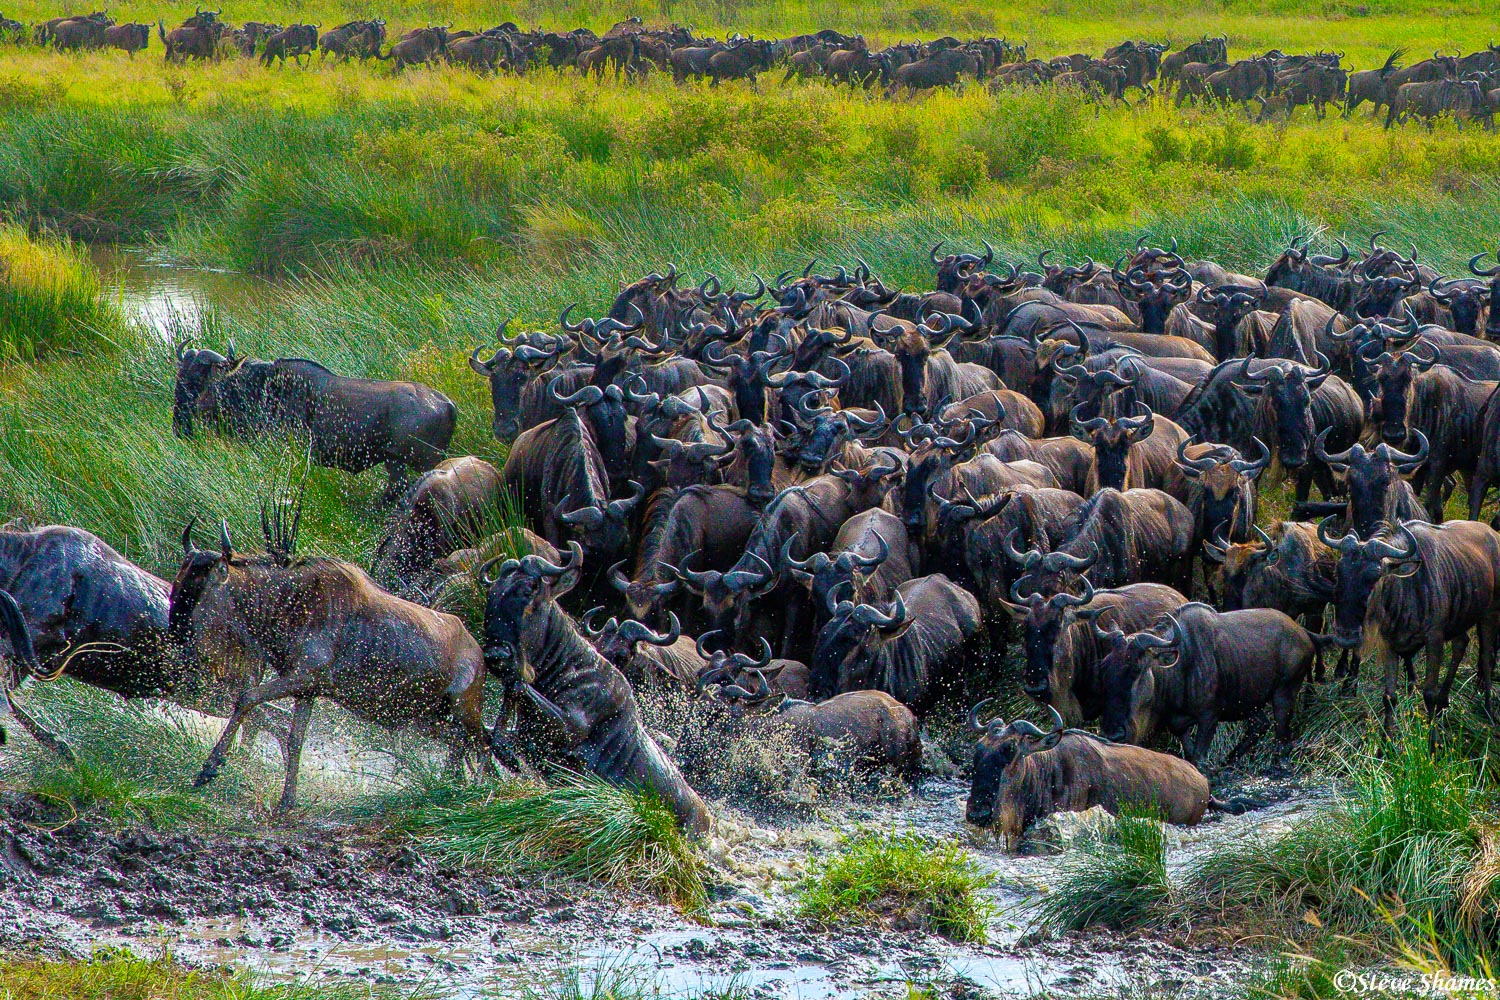 Wildebeest cross water in a panicky mood. Crossing water is dangerous for them.